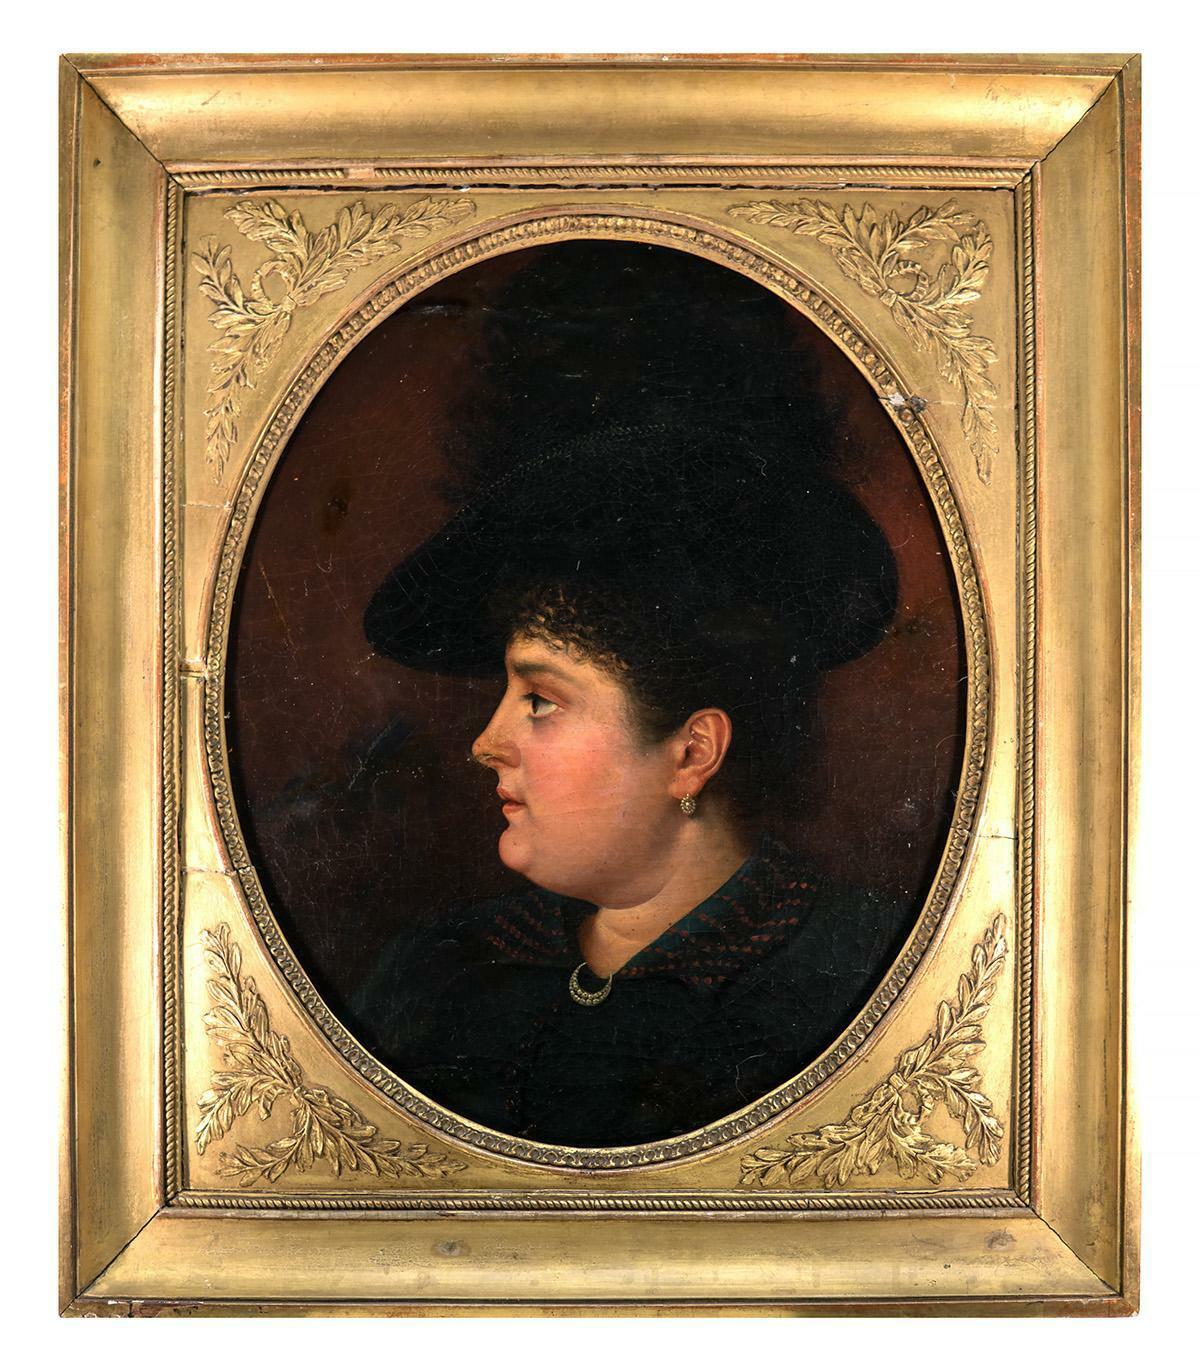 Antique French Oil Painting, Portrait of Woman c.1840s, Fine Frame, Jewelry, Hat